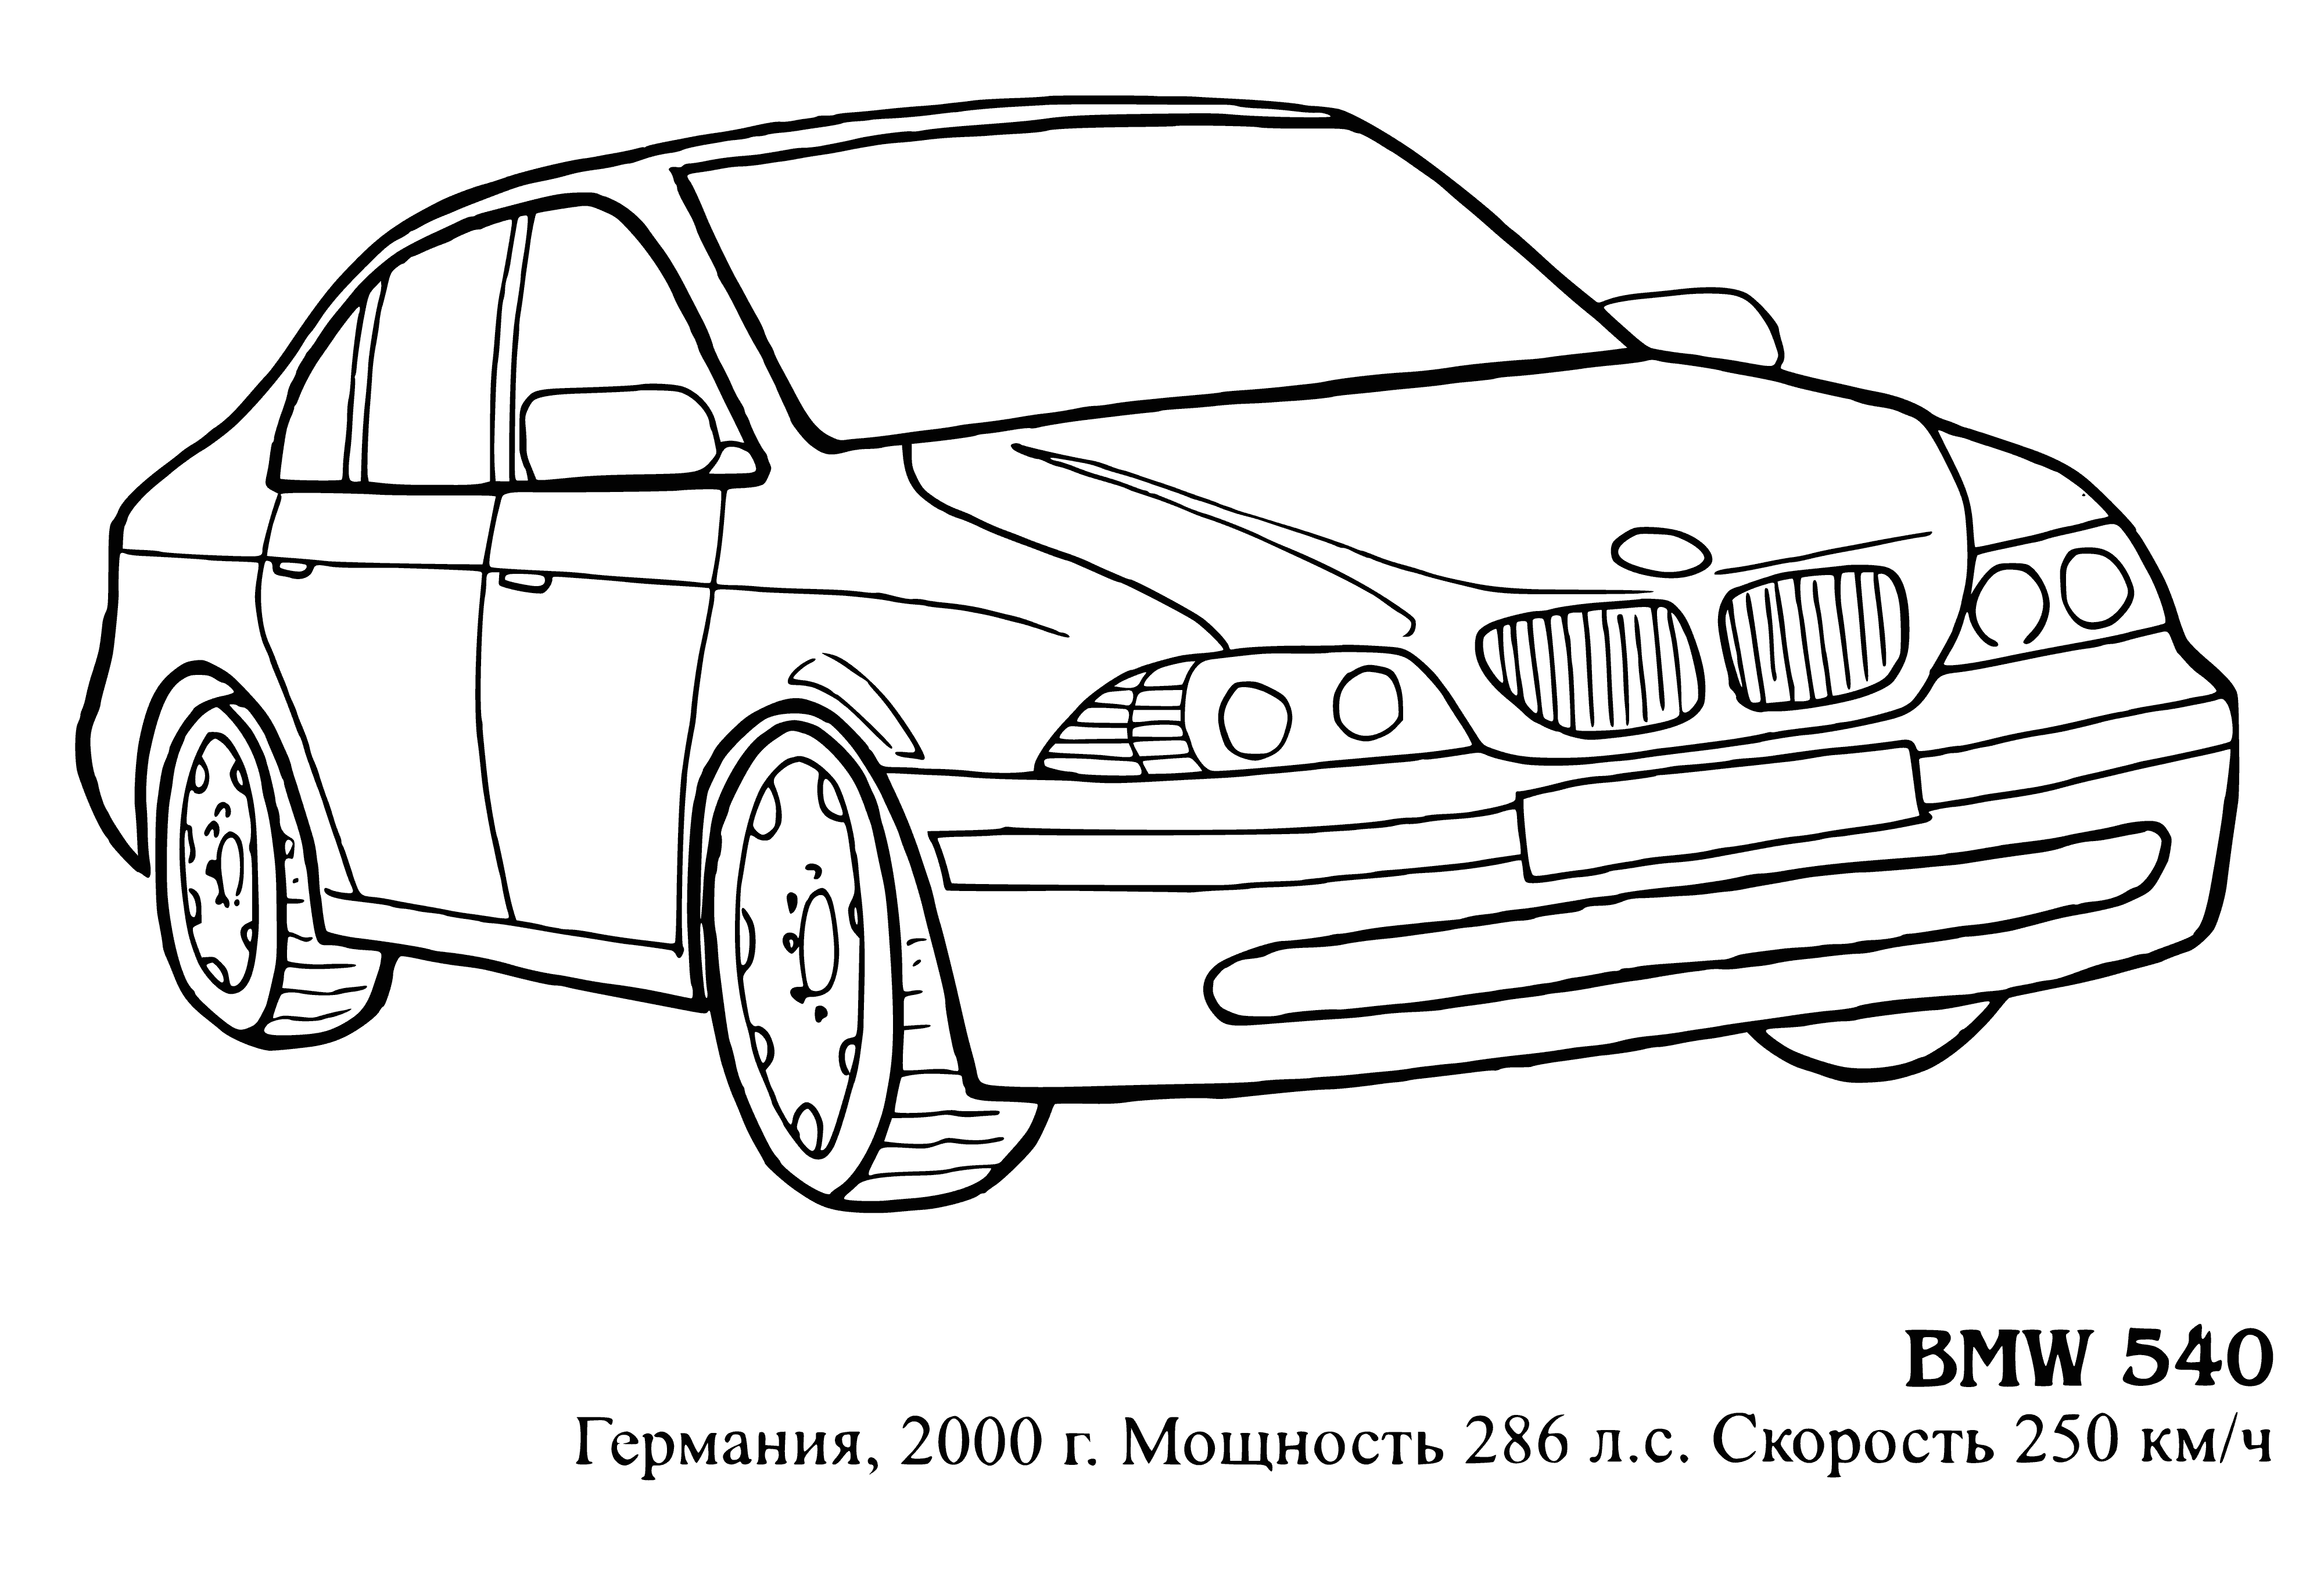 coloring page: Coloring page of a silver BMW 540 with 4 doors, sunroof, tinted windows, spoiler, antenna and black/silver tires/rims. #coloringpages